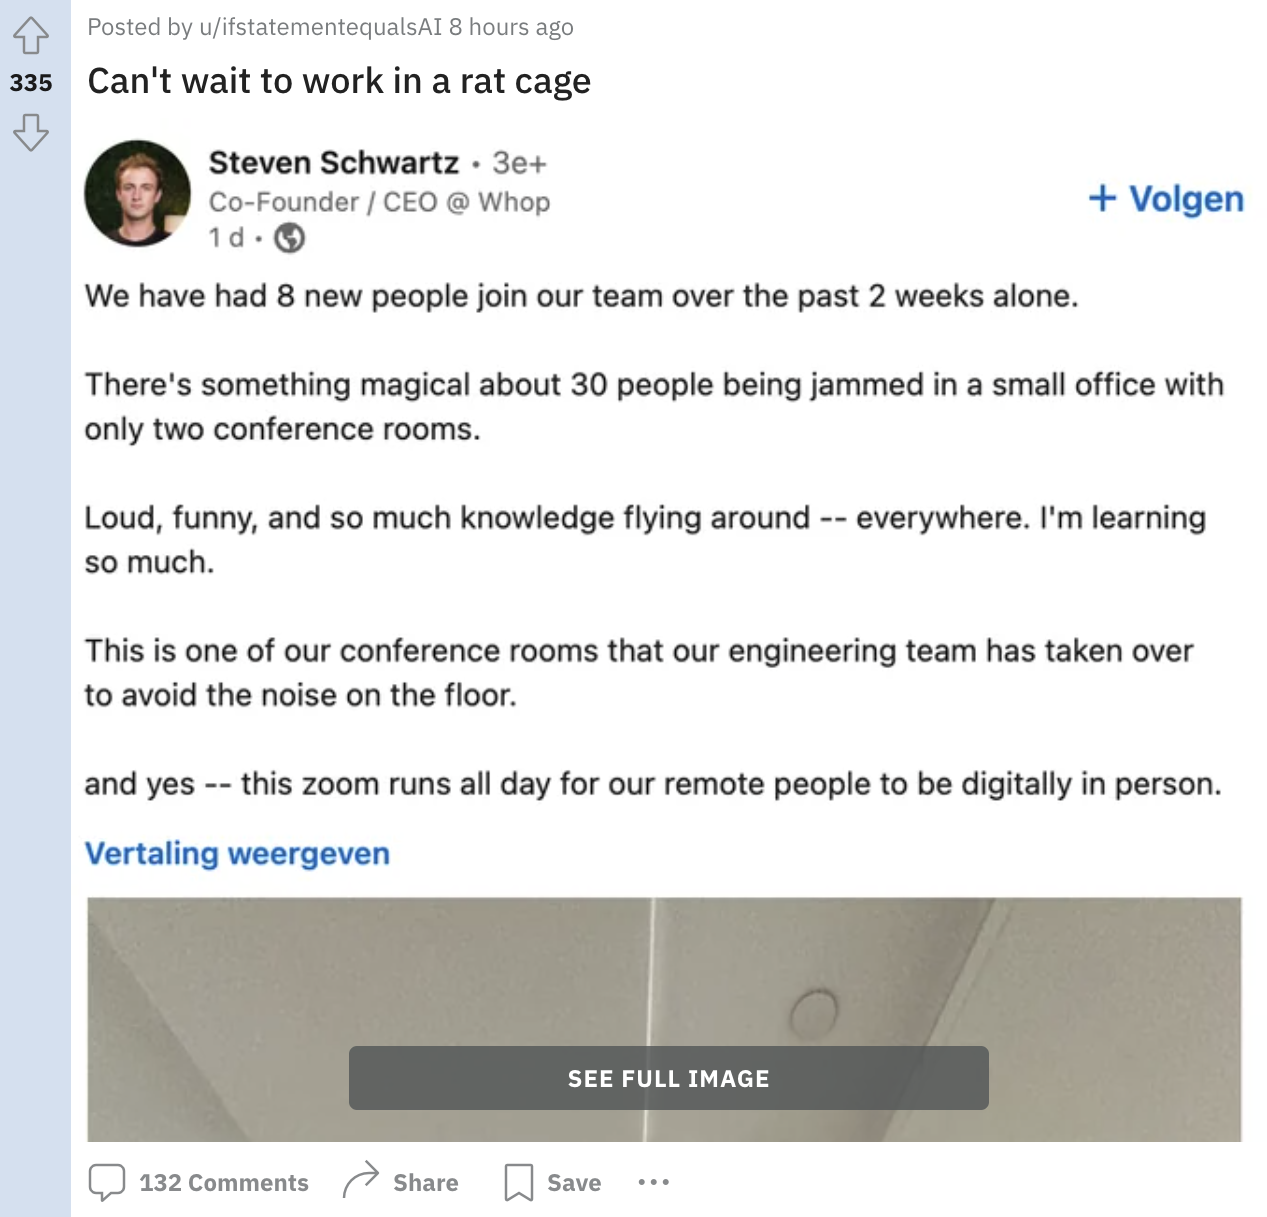 screenshot - Posted by uifstatementequalsAI 8 hours ago 335 Can't wait to work in a rat cage Steven Schwartz. 3e CoFounderCeo @ Whop 1d We have had 8 new people join our team over the past 2 weeks alone. Volgen There's something magical about 30 people be